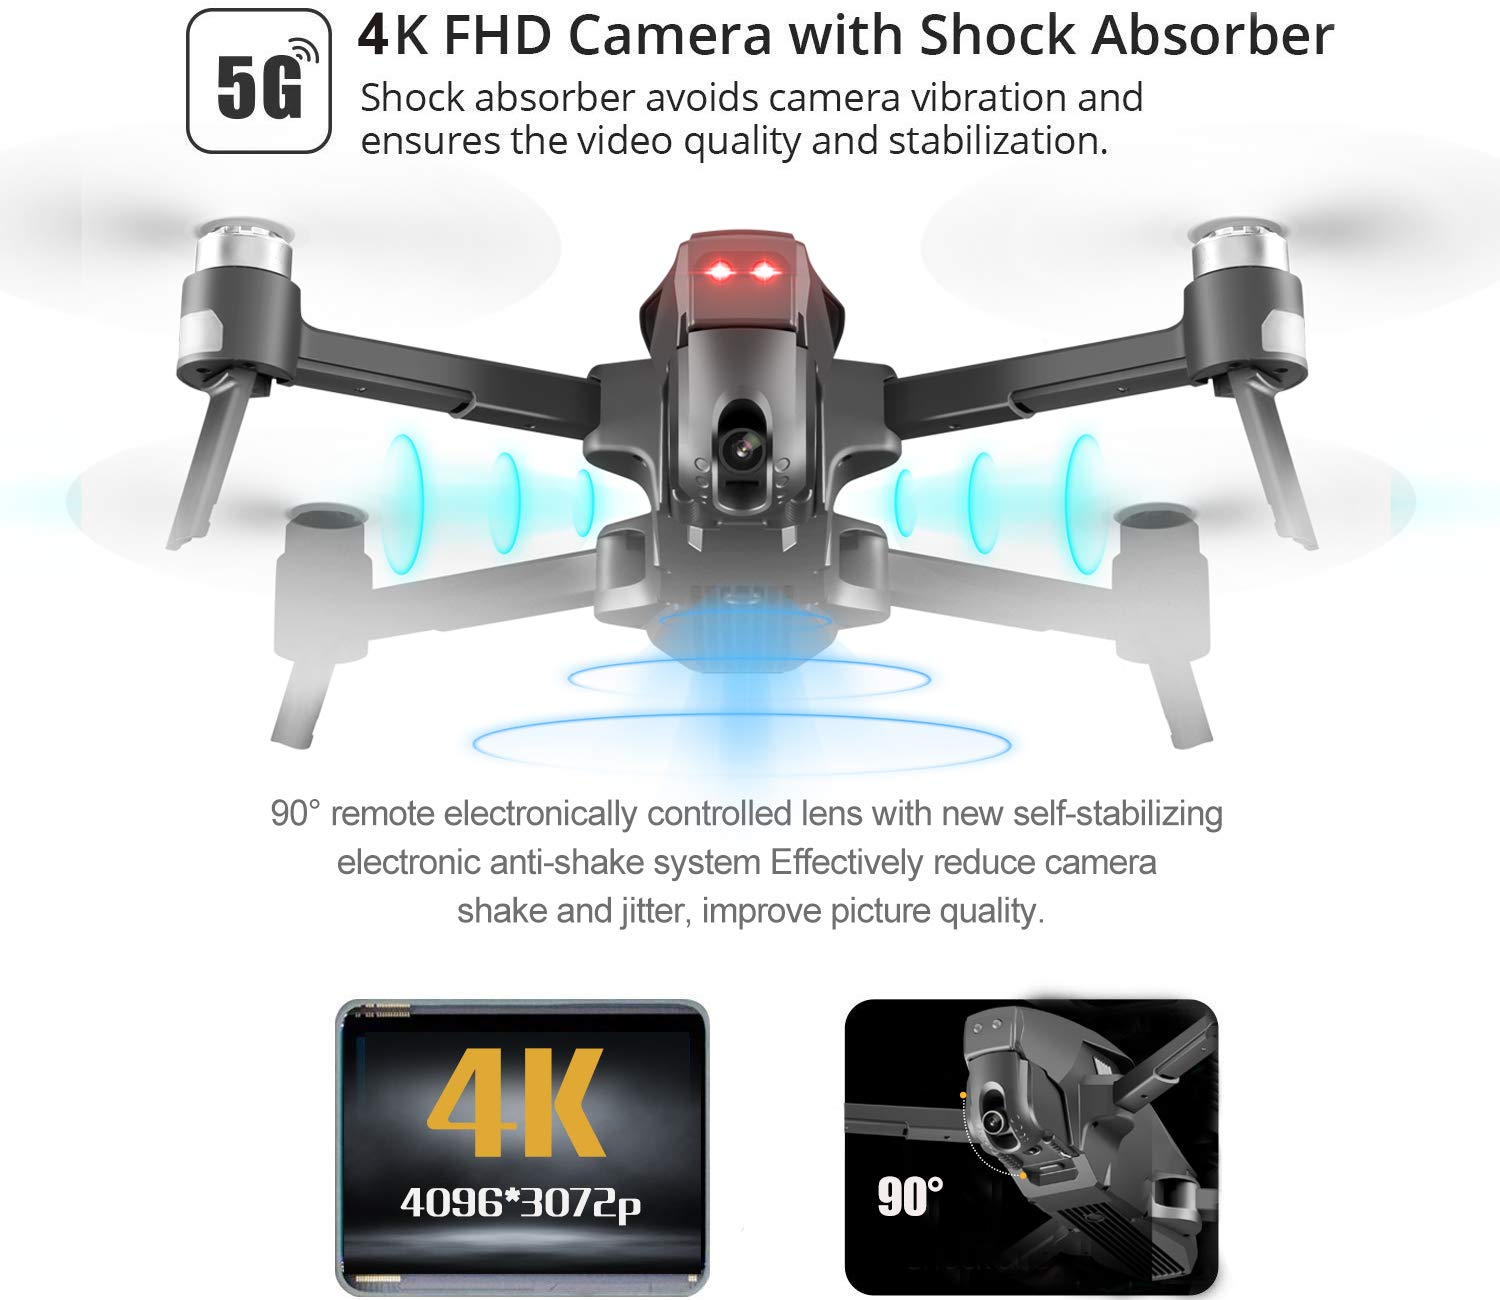 Details about  / 4DRC M1 2021 NEW Drone 5G FPV Brushless 4K HD Camera GPS RC Quadcopter Foldable